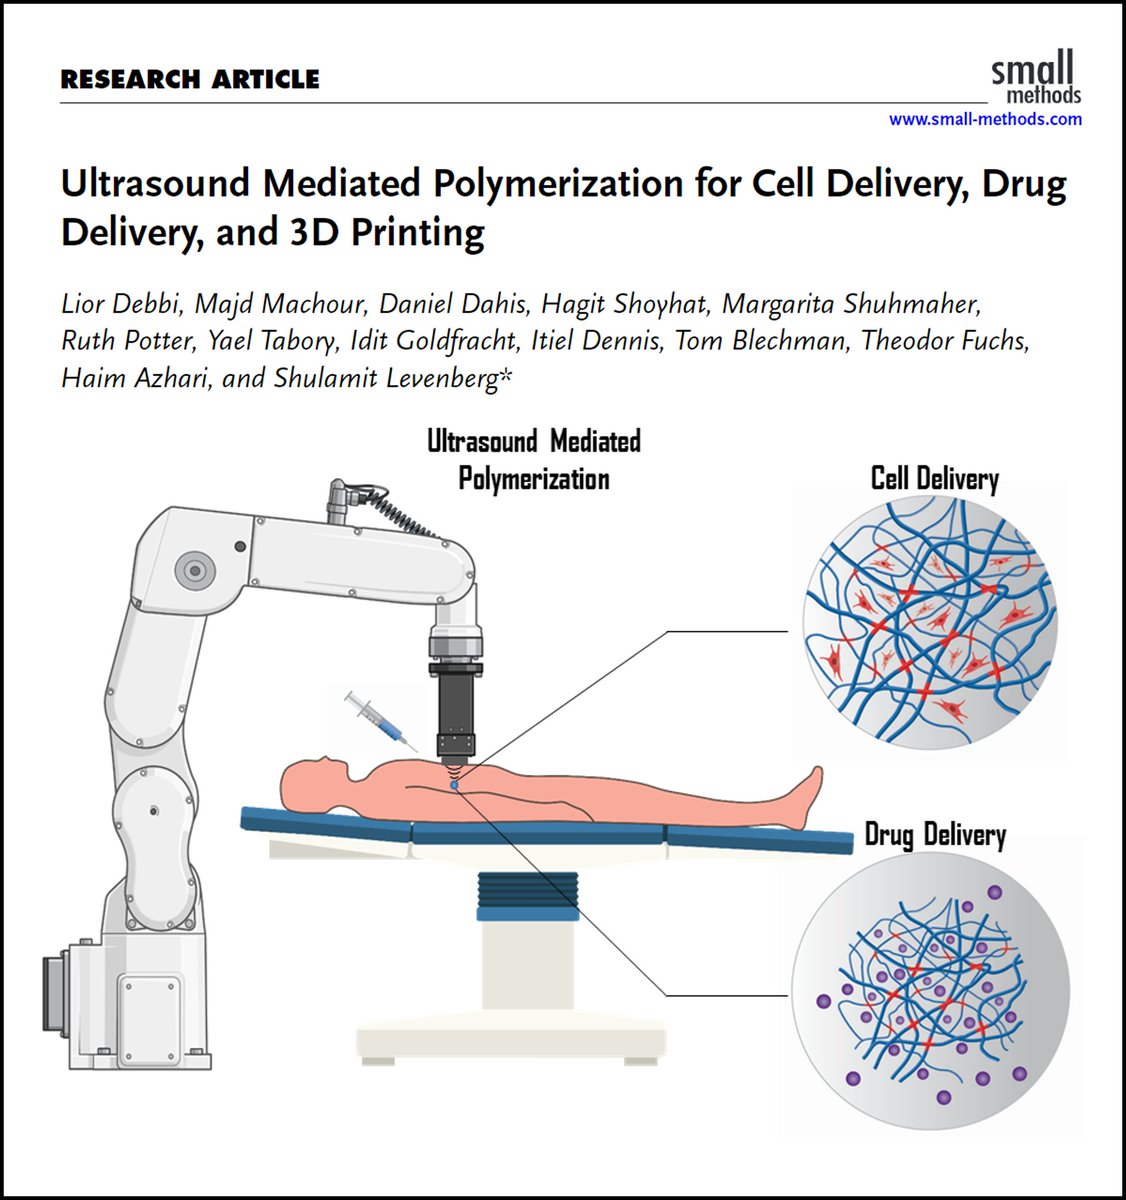 We are thrilled to announce the publication of our latest paper in Small Methods! This work presents a non-invasive delivery method for scaffolds, cells, and drugs deep into the body. Read the full article here: onlinelibrary.wiley.com/doi/epdf/10.10… Congratulations to the entire research team!